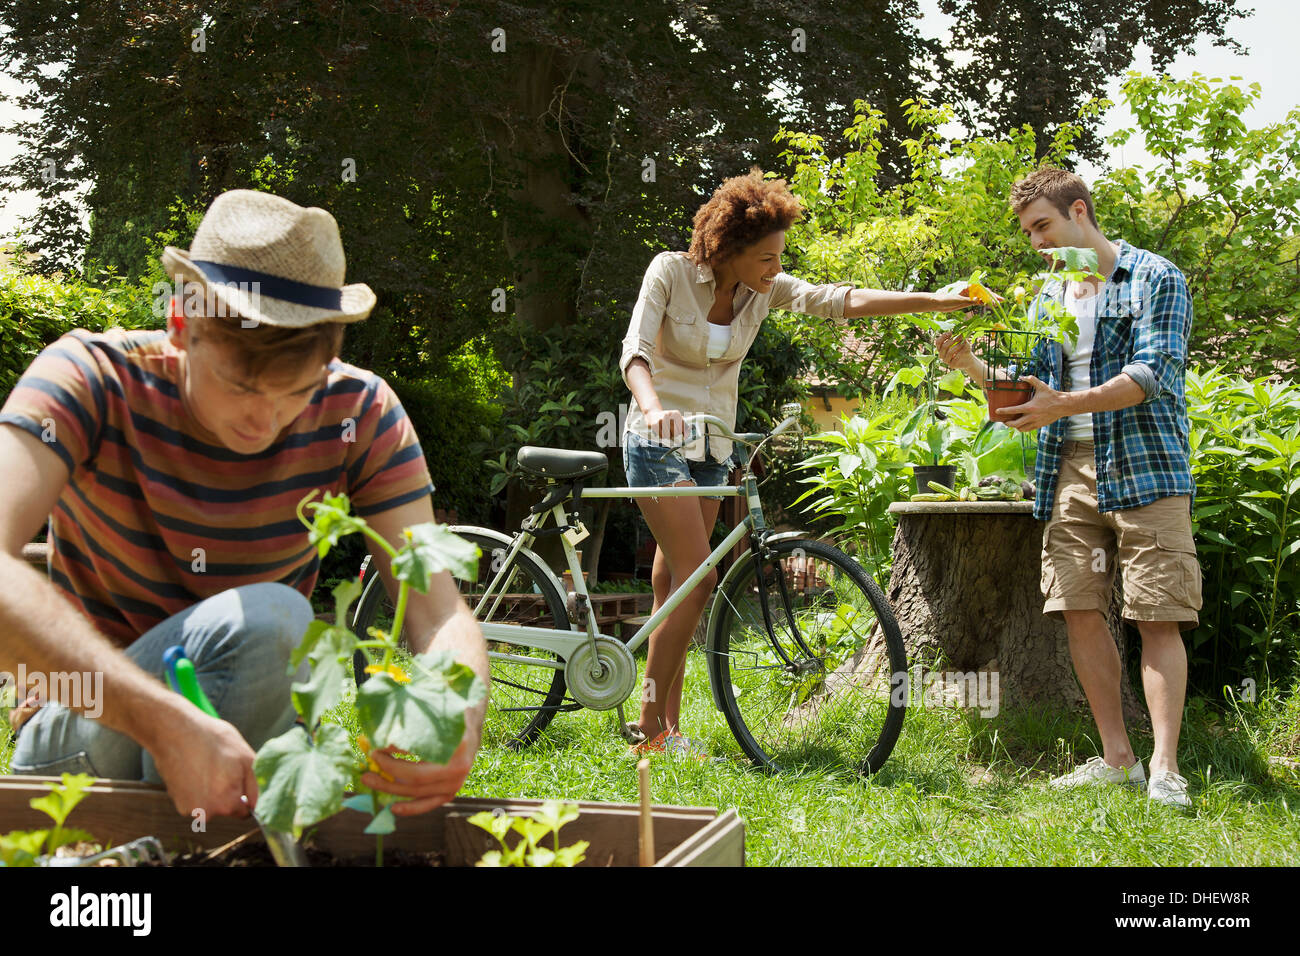 Friends gardening, woman with bicycle Stock Photo